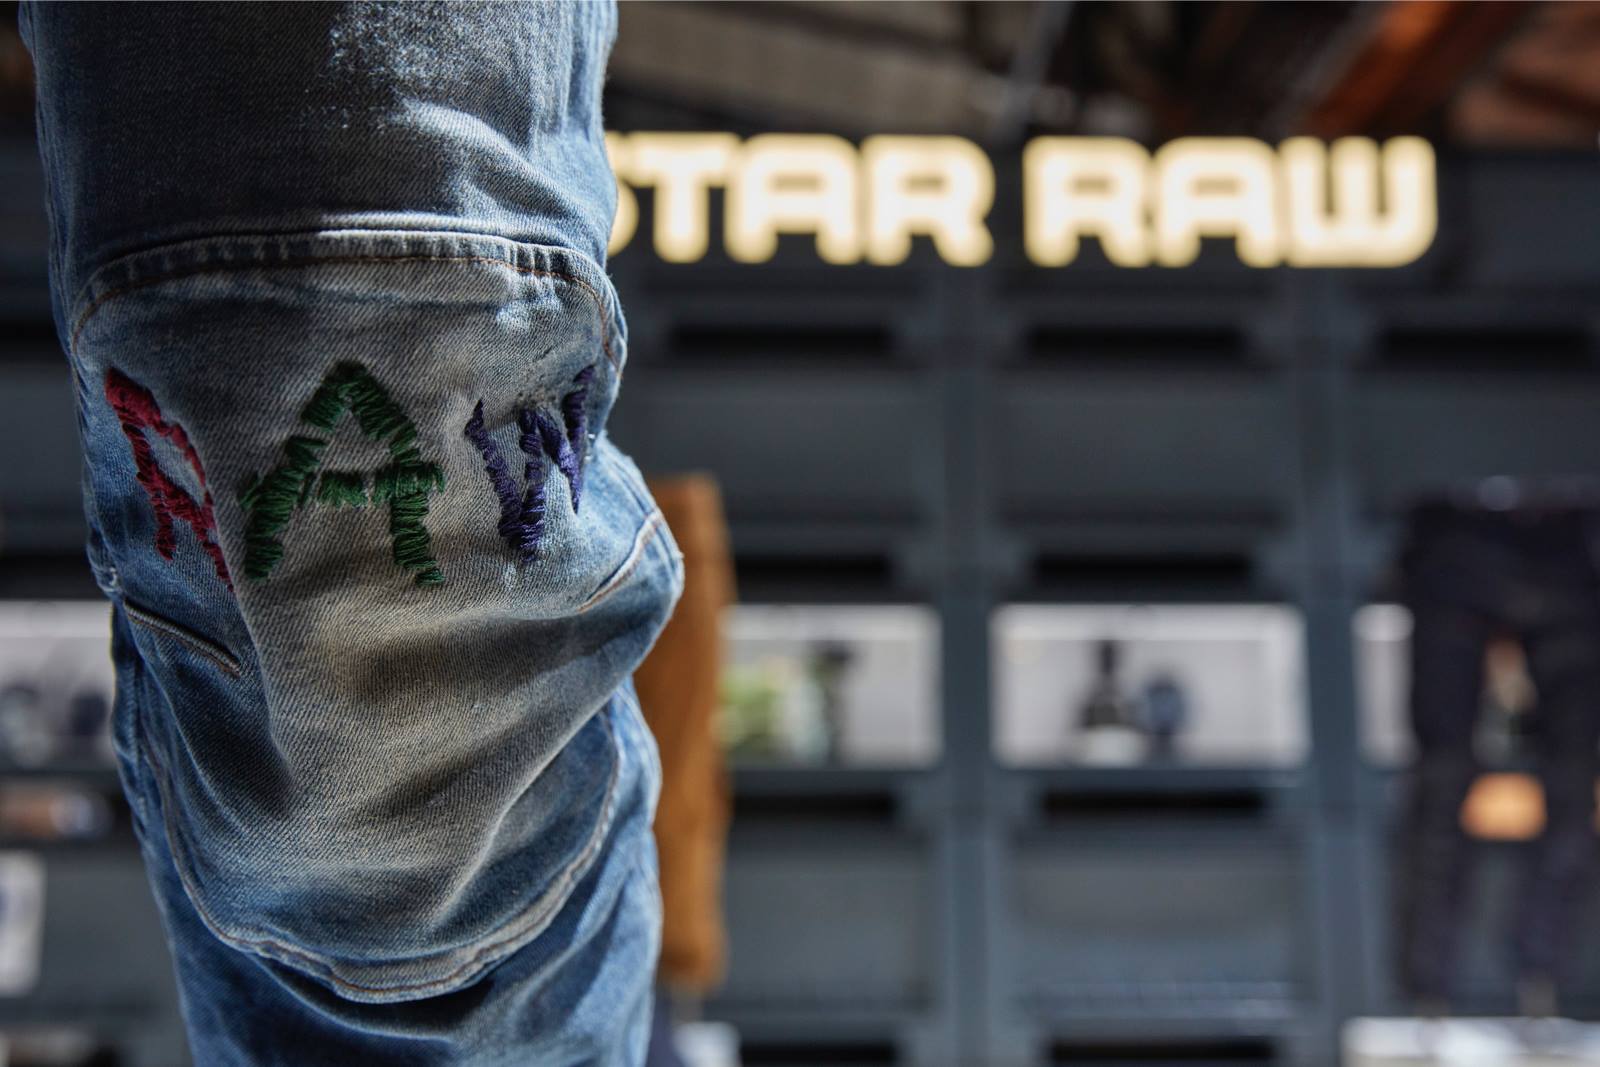 G-Star Raw Lenox To Relocate, Reopen 